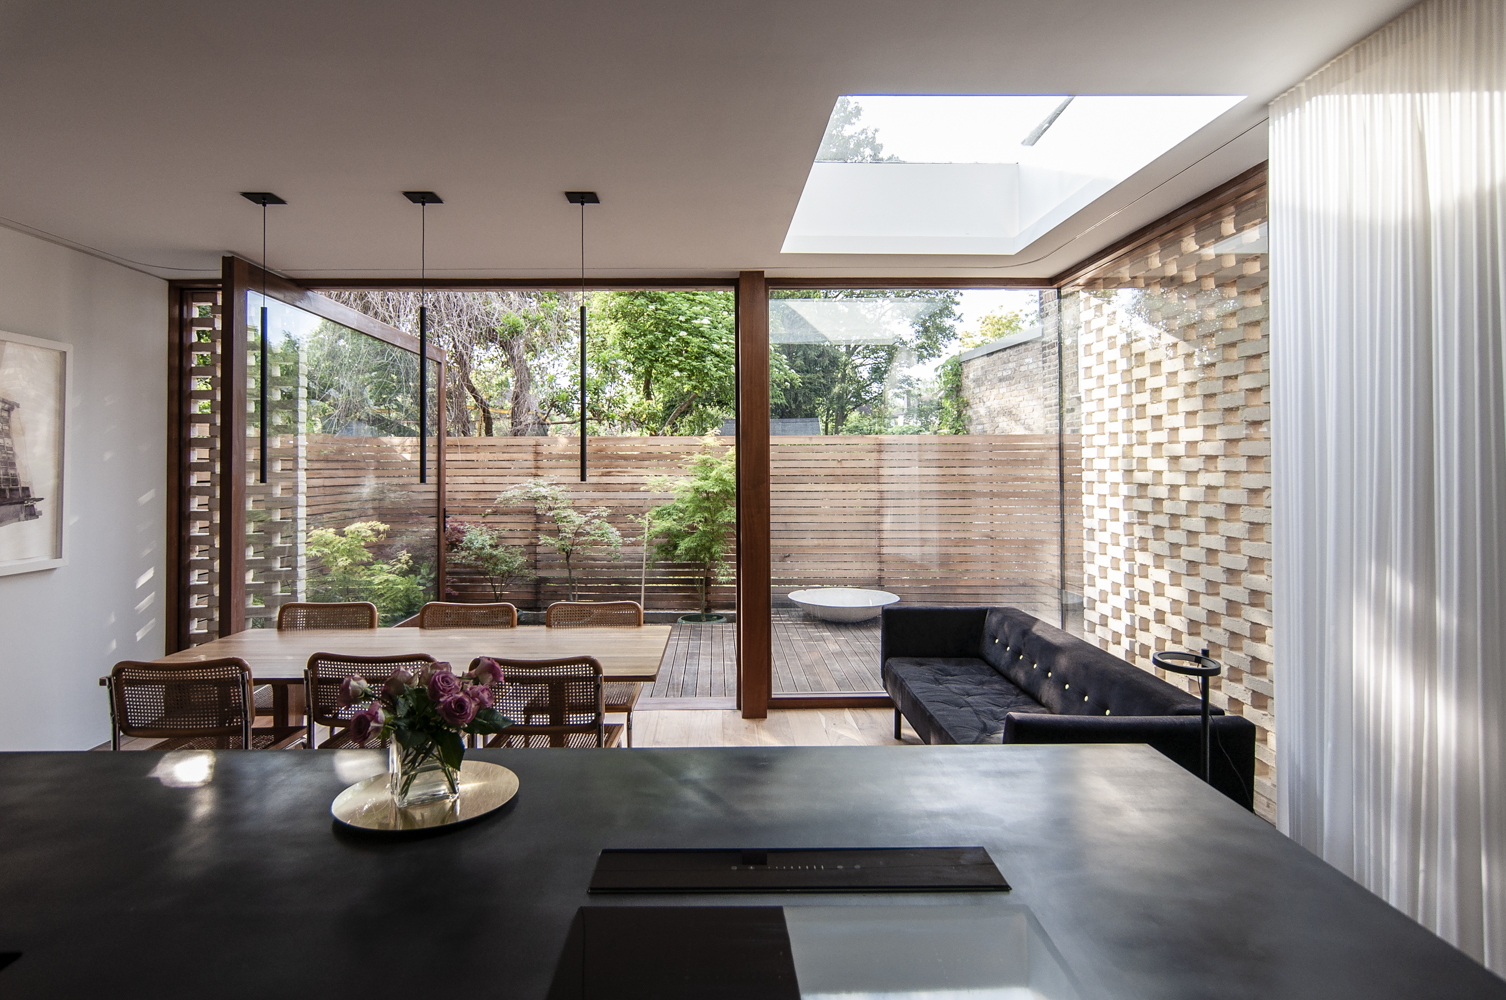 </p> <p>Find your ideal home design pro on designfor-me.com - get matched and see who's interested in your home project. Click image to see more inspiration from our design pros</p> <p>Design by Ash, architect from Lambeth, London</p> <p>#architecture #homedesign #modernhomes #homeinspiration #extensions #extensiondesign #extensioninspiration #extensionideas #houseextension #slidingdoors #skylights #rooflights </p> <p>